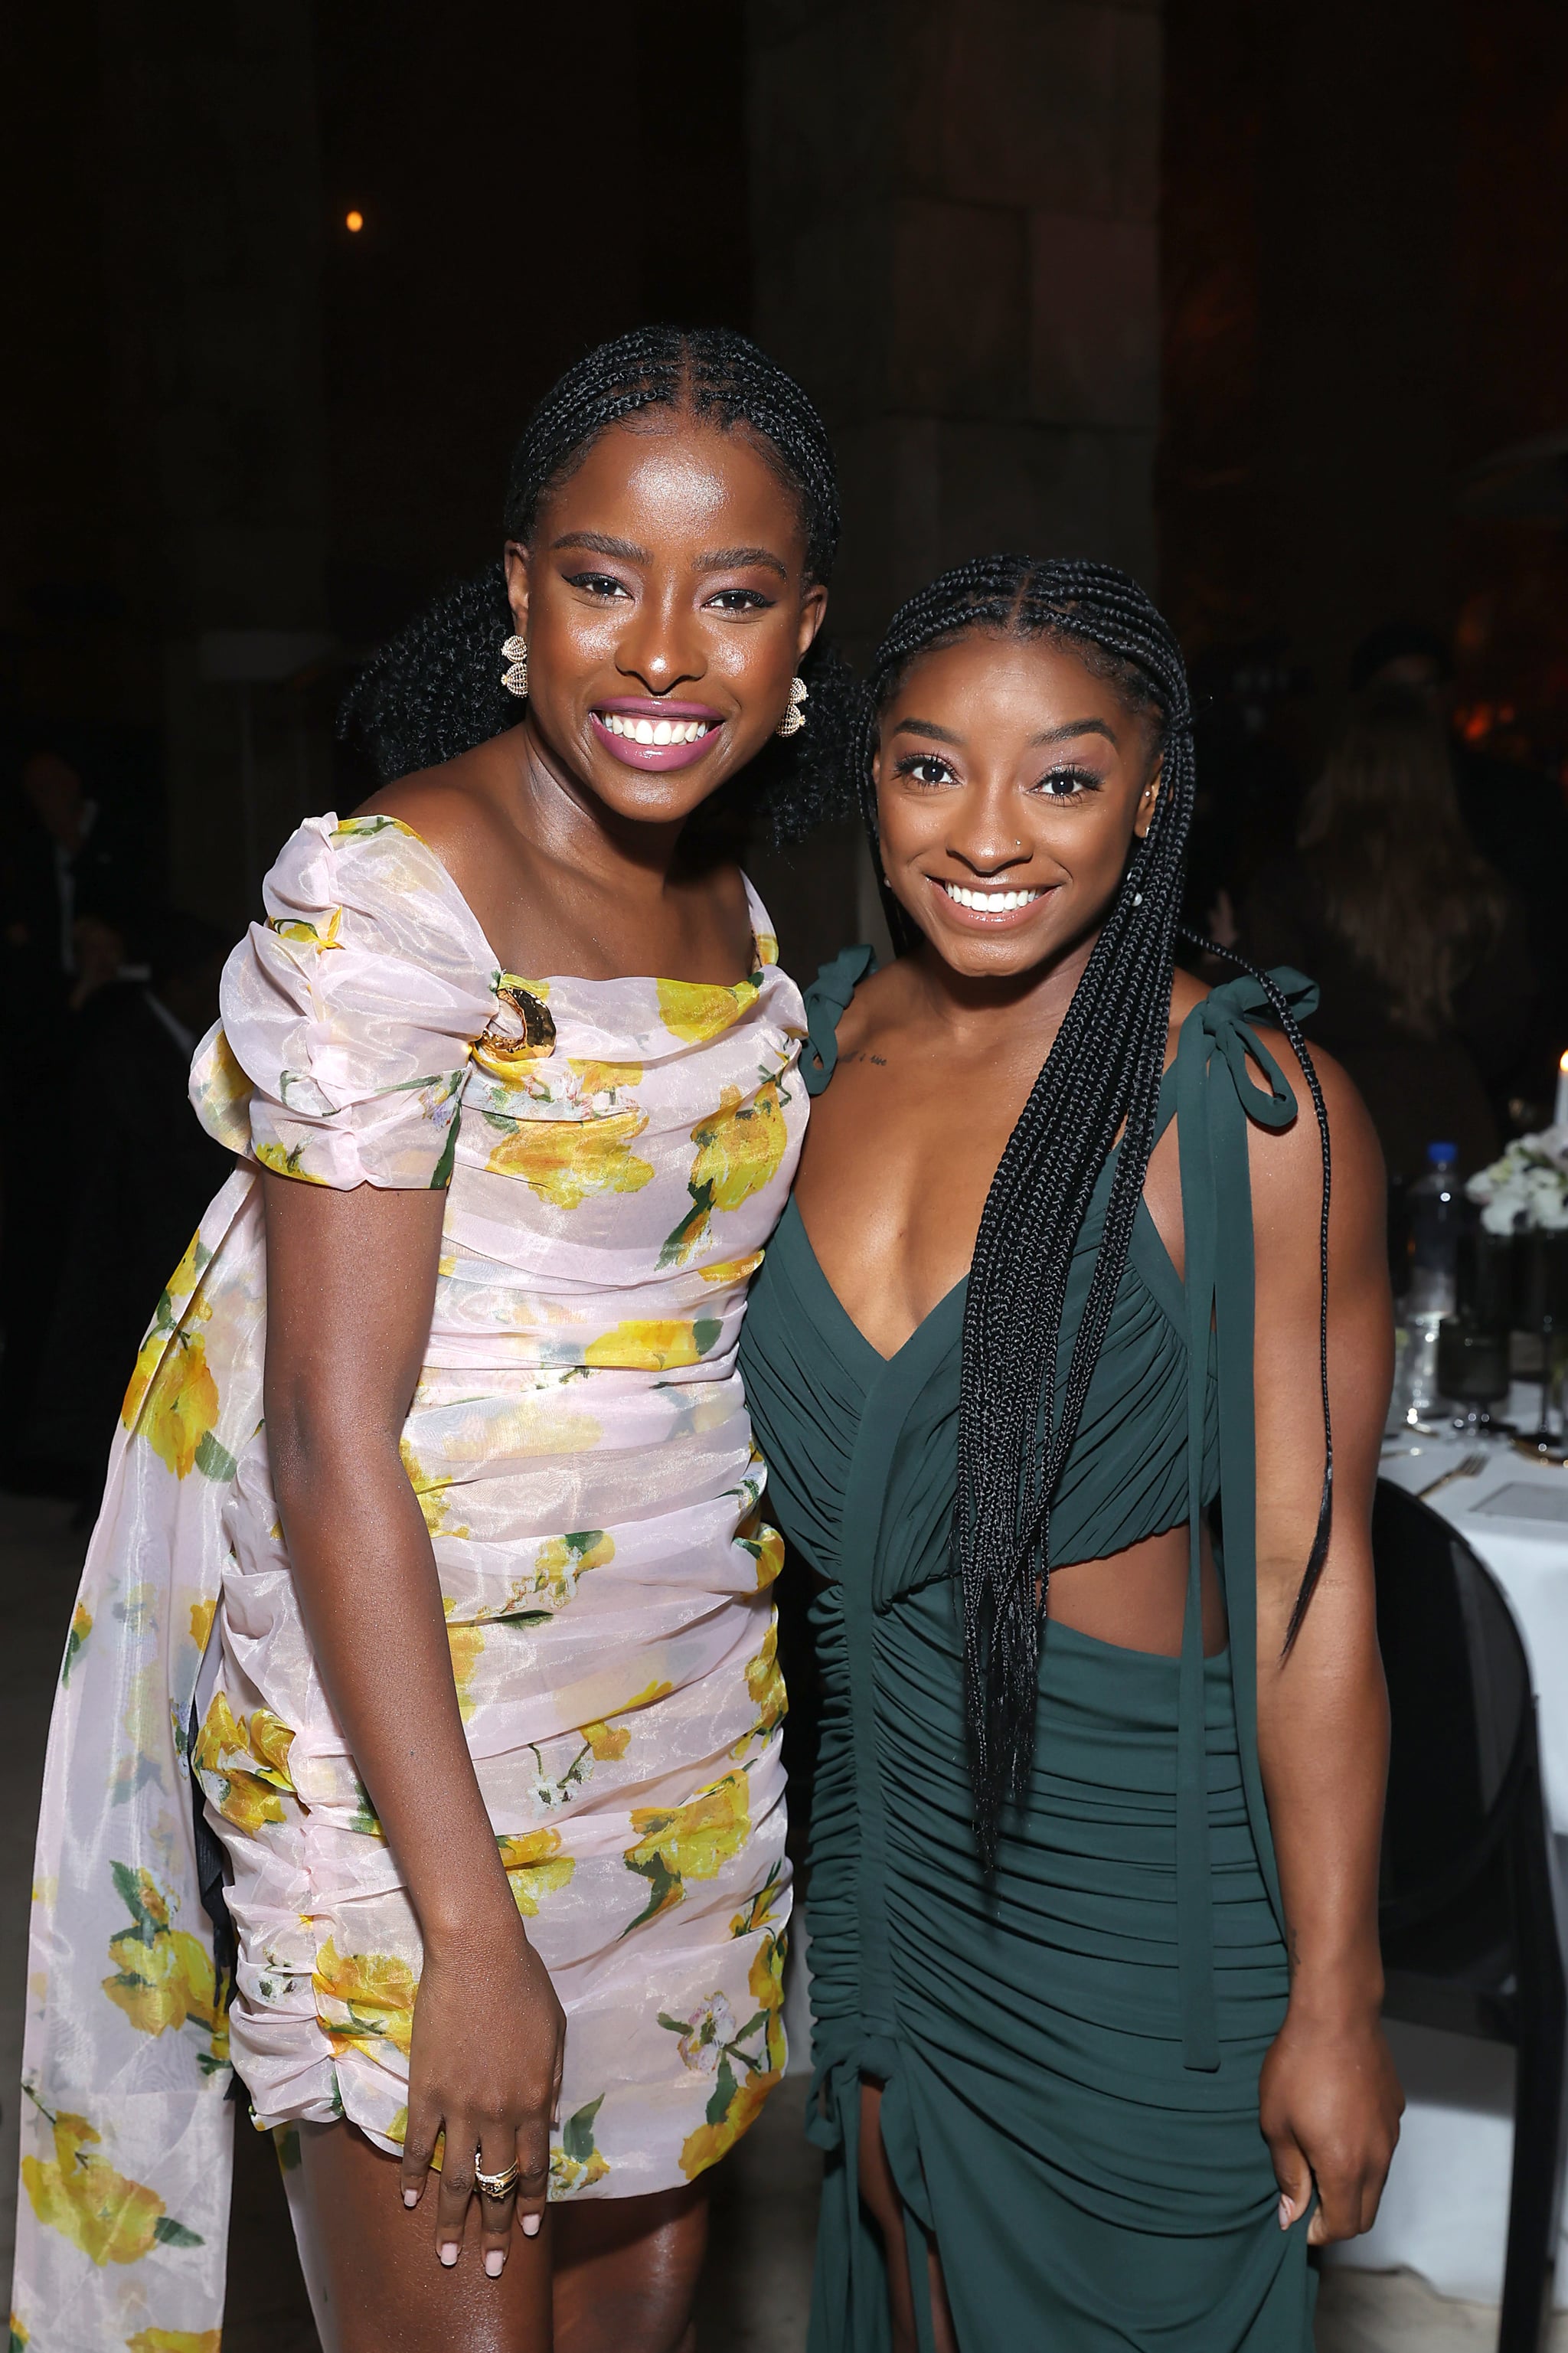 LOS ANGELES, CALIFORNIA - NOVEMBER 15: (L-R) Amanda Gorman and honoree Simone Biles attend the 2021 InStyle Awards at The Getty Center on November 15, 2021 in Los Angeles, California. (Photo by Emma McIntyre/Getty Images for InStyle)